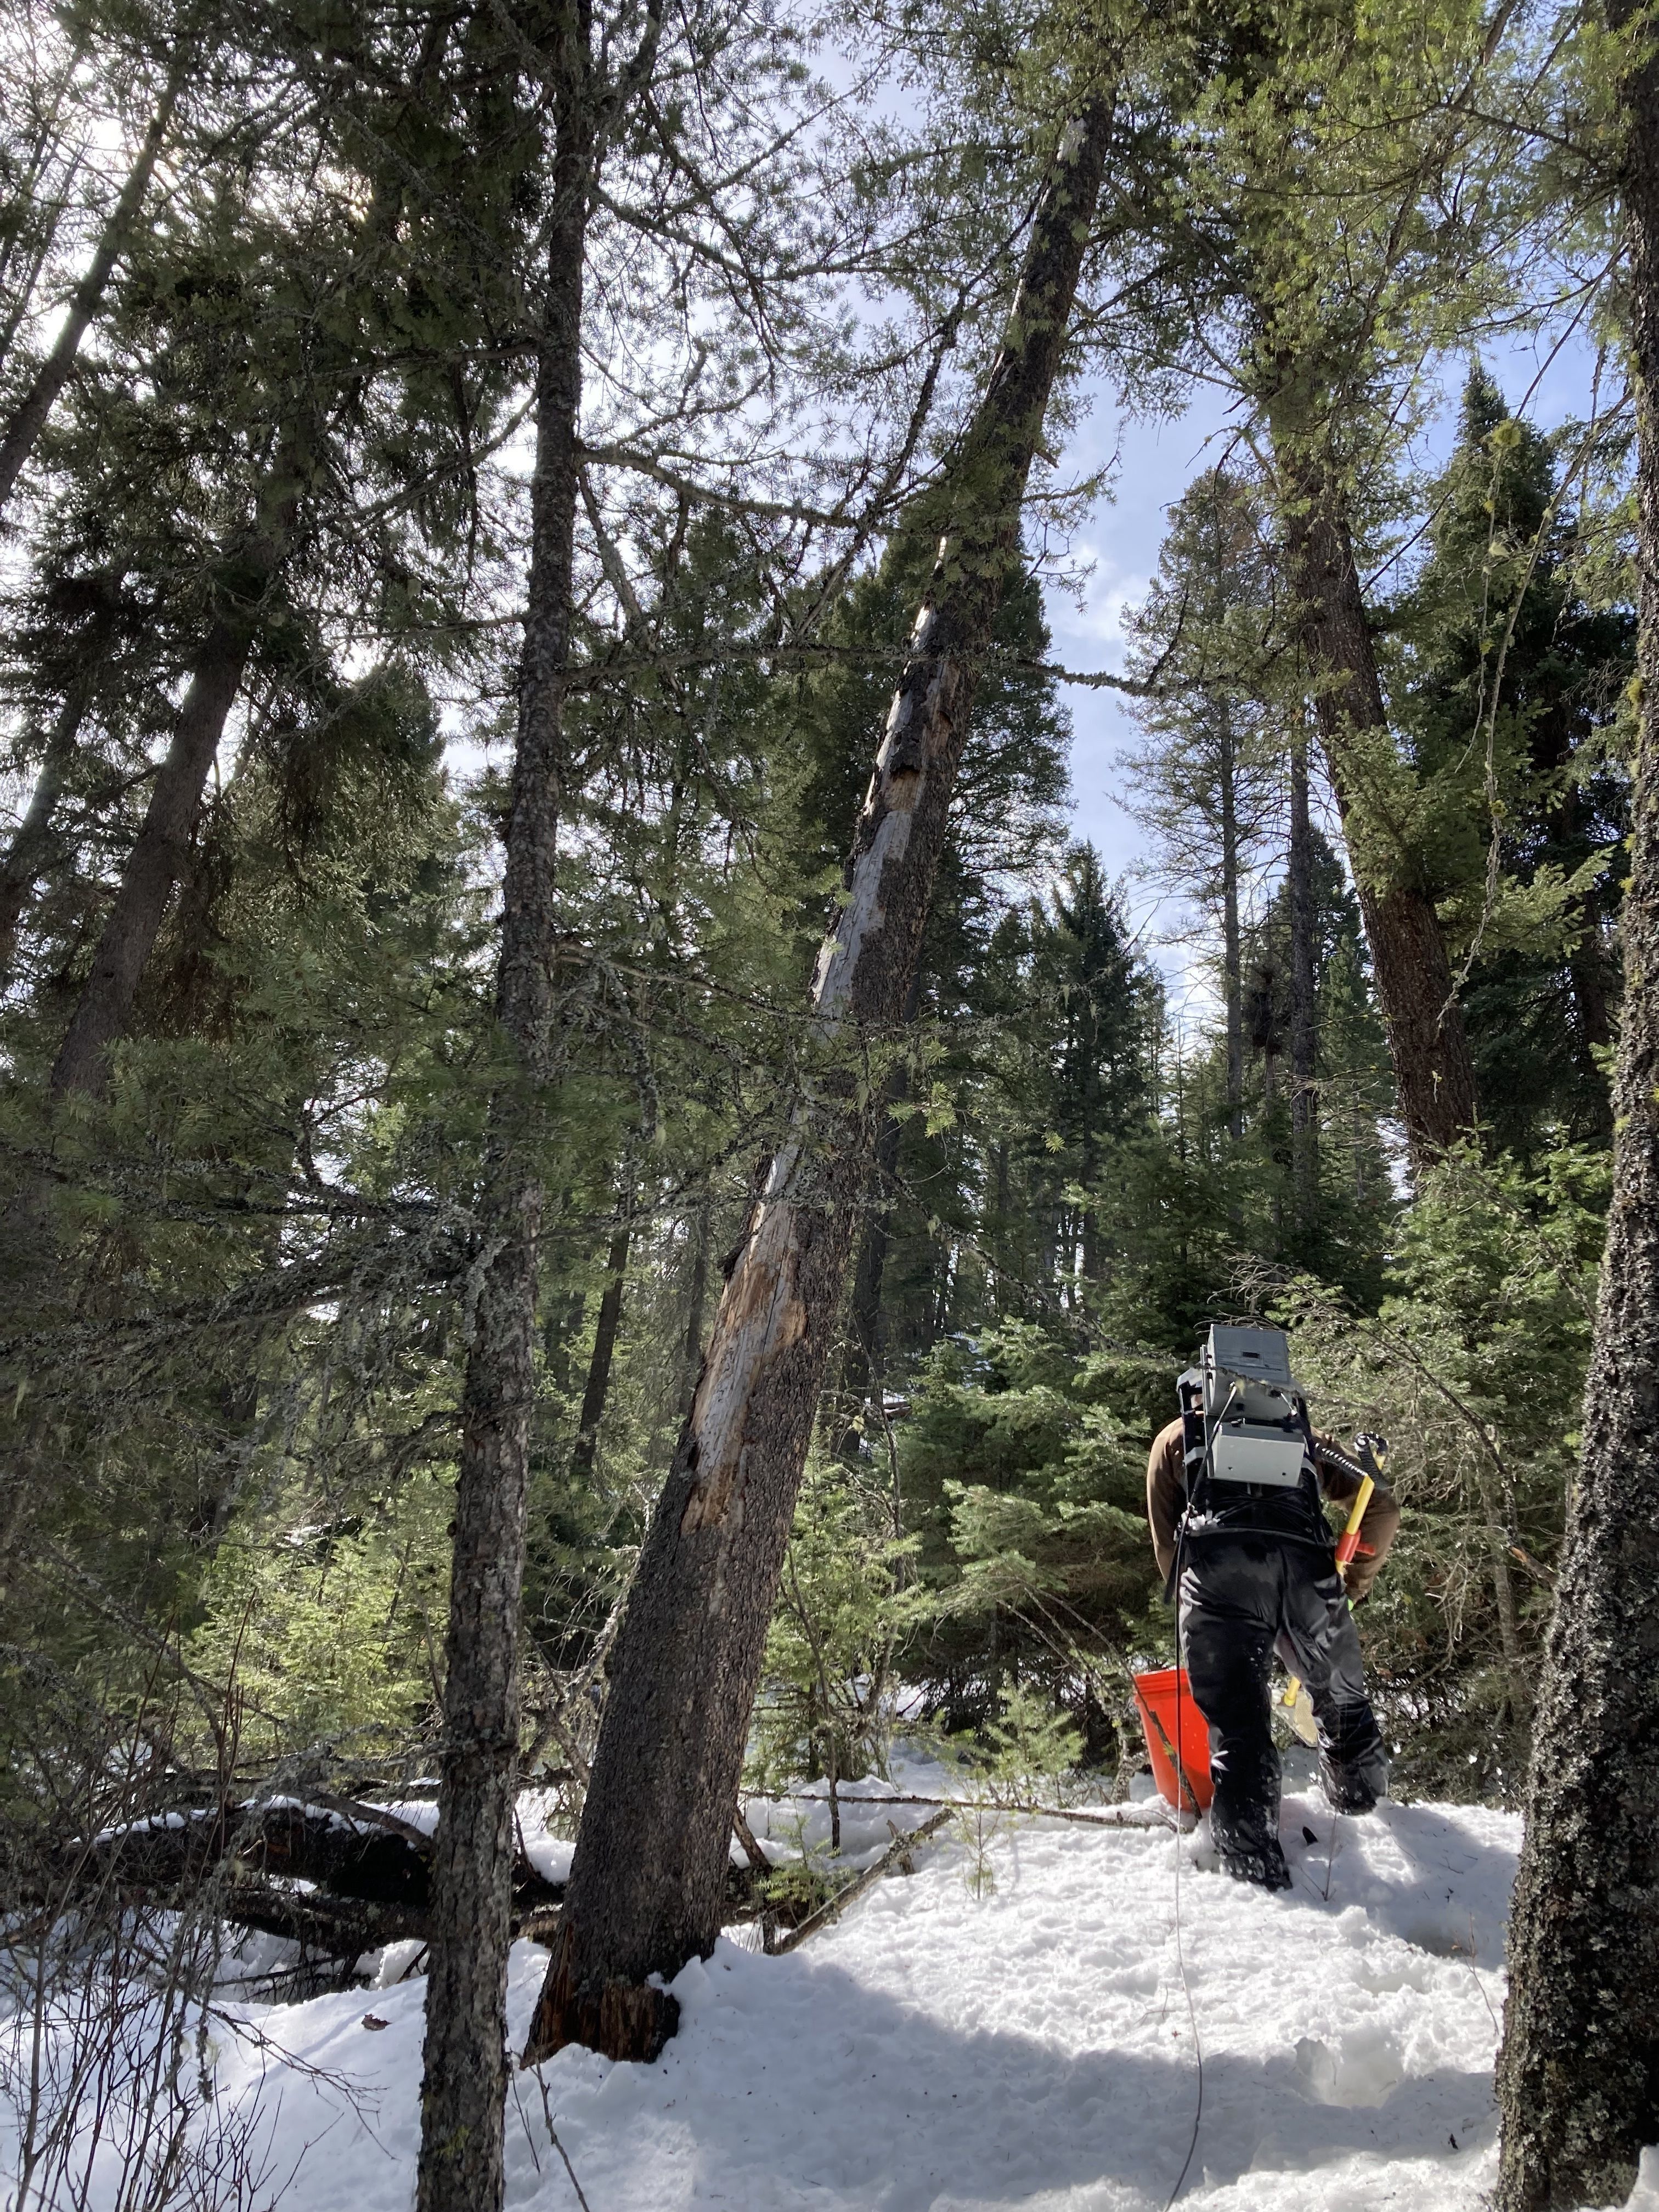 A view into a forest. In the foreground is a person wearing an electrofishing backpack. There is snow on the ground.